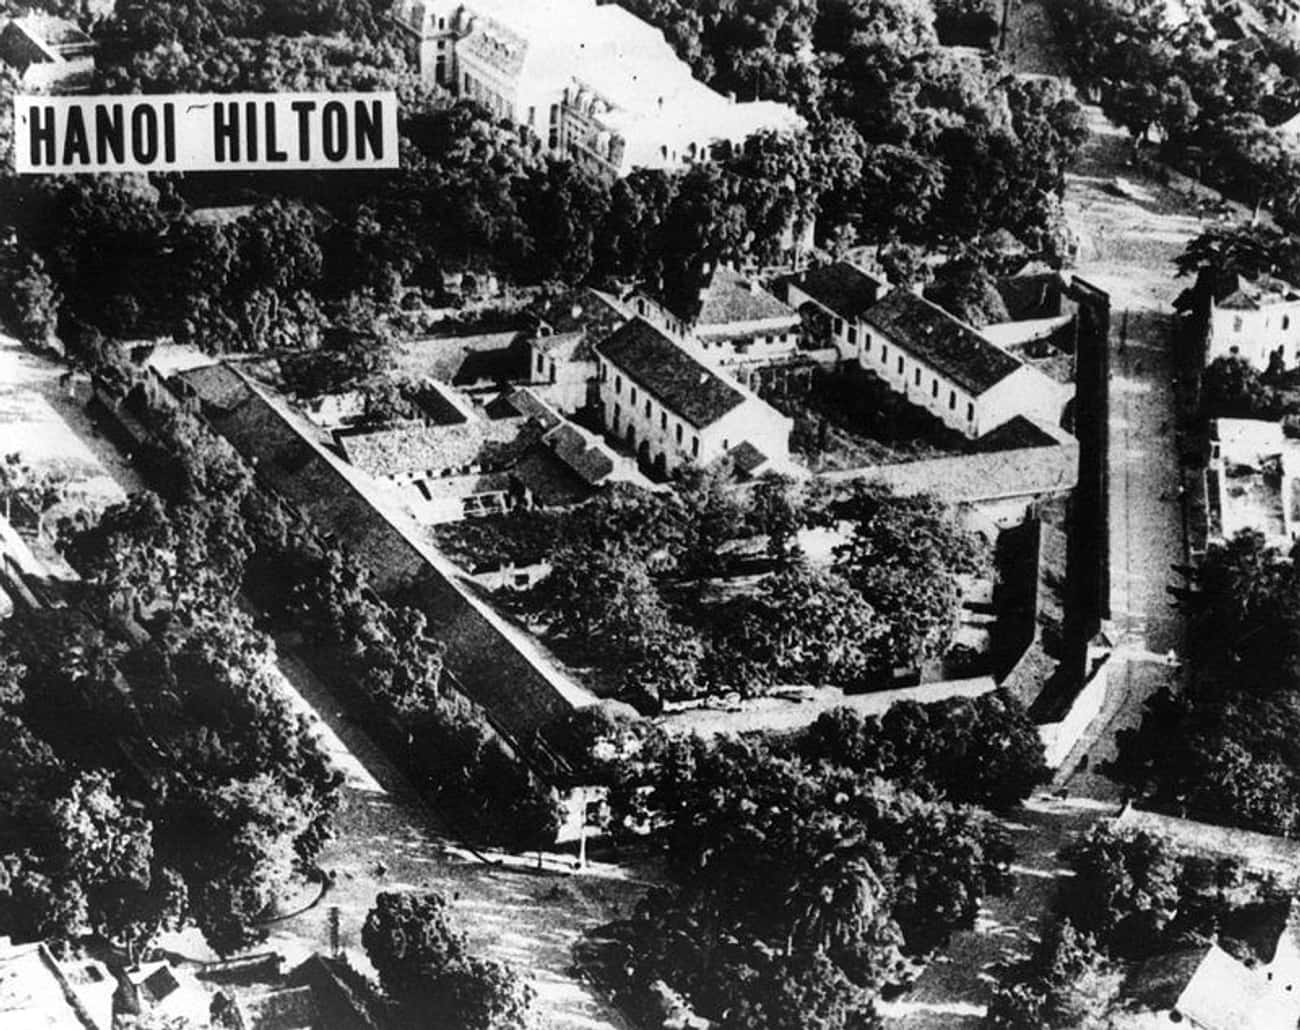 Many American POWs Were Detained At The 'Hanoi Hilton'